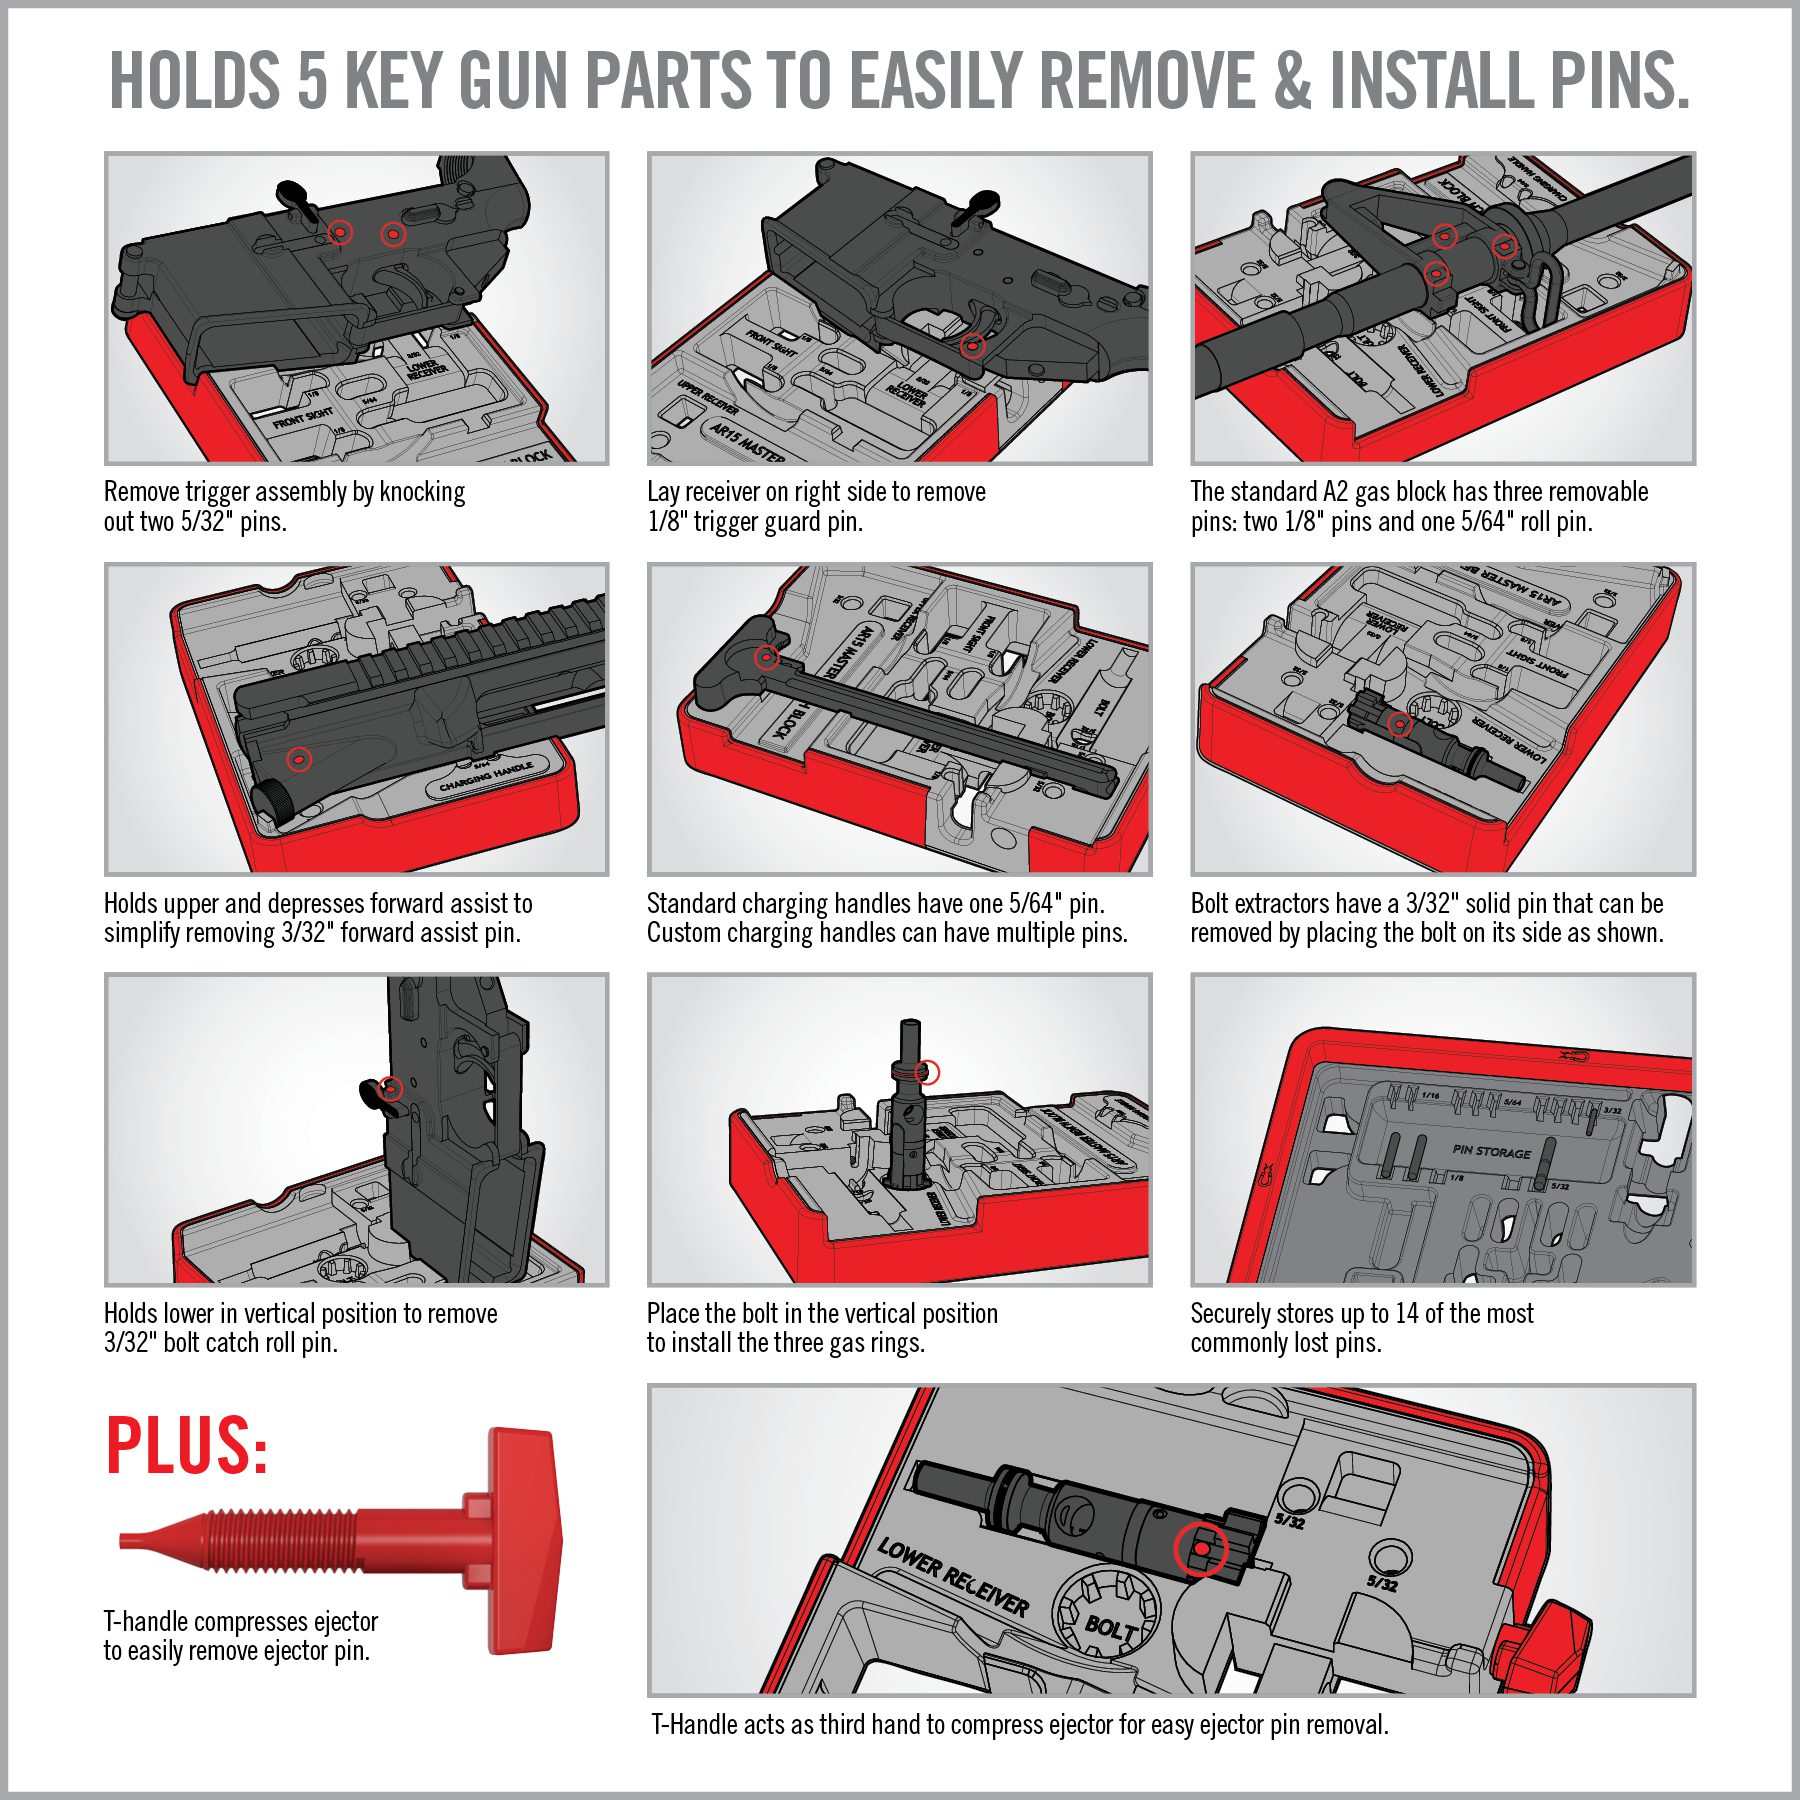 instructions on how to install and use the gun